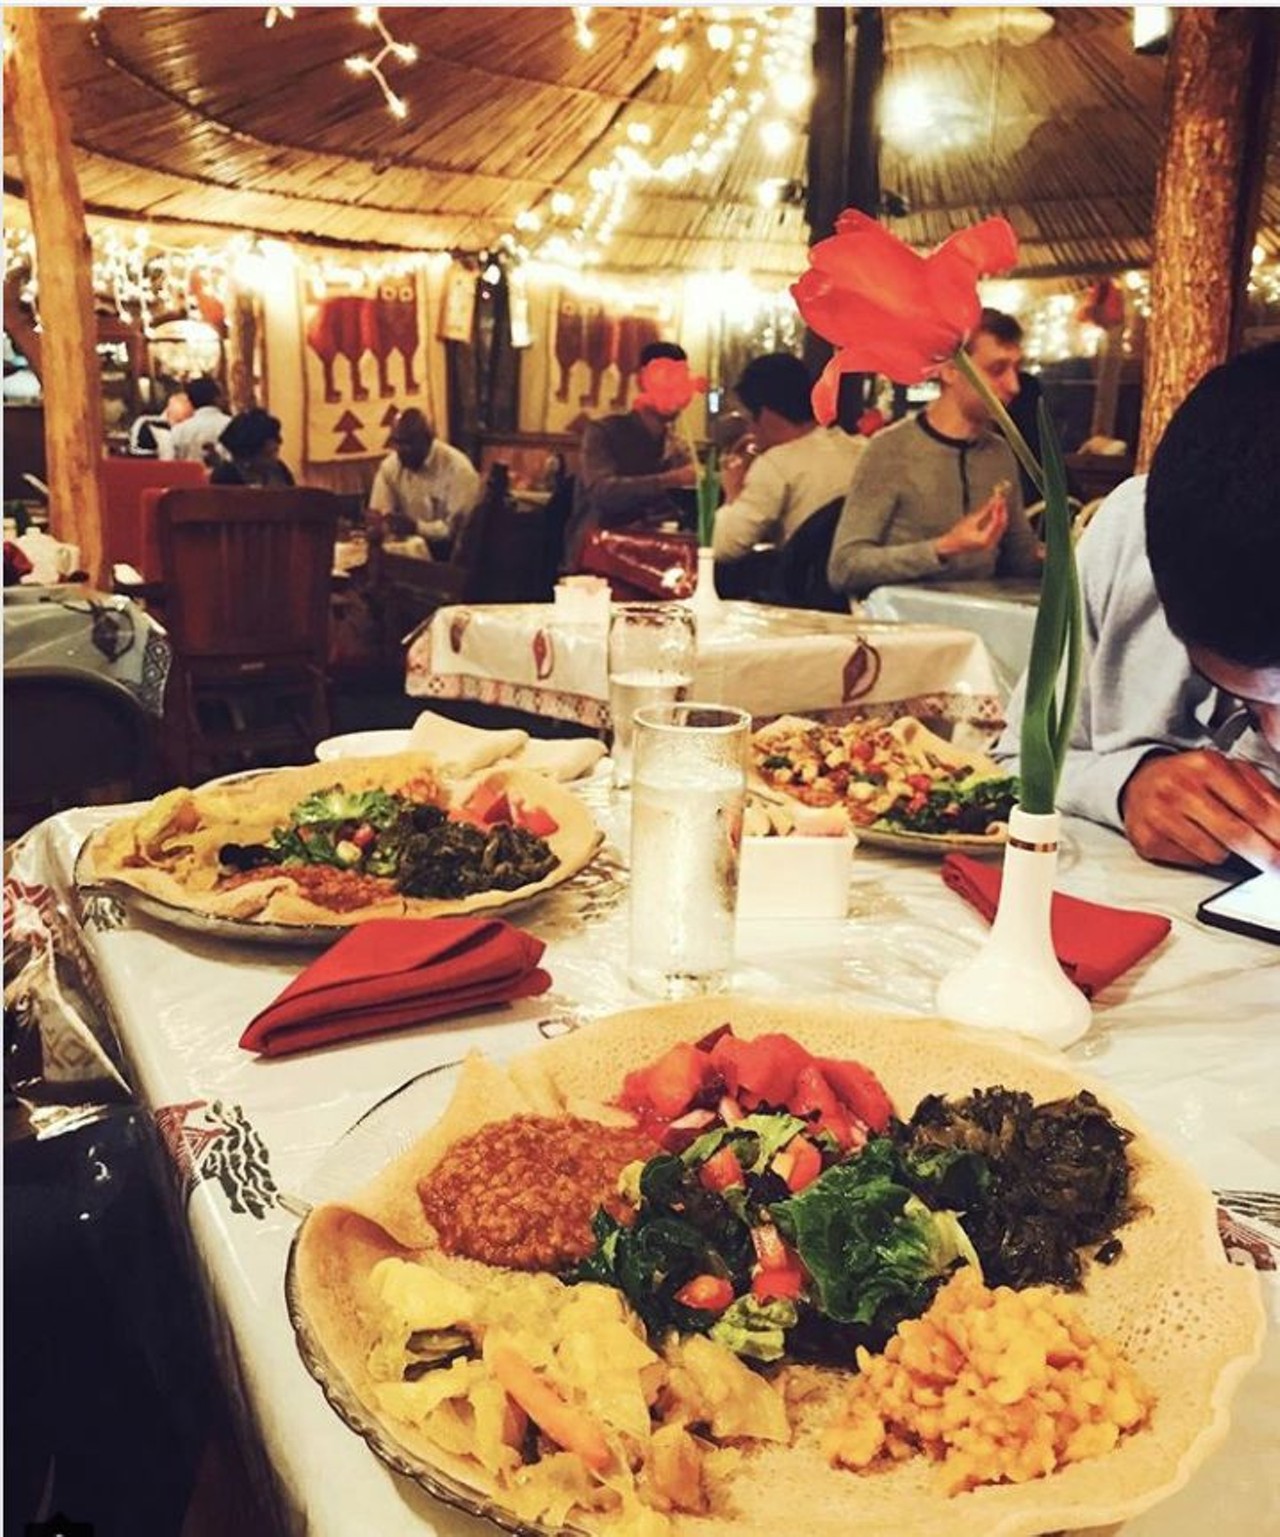  Empress Taytu
6125 St Clair Ave., 216-391-9400
Empress Taytu gets its name from the Ethiopian royal of the same name, so expect an authentic African dining experience. The restaurant gets tight on weekends so consider making a reservation. 
Photo via  whitecoatbyday/Instagram